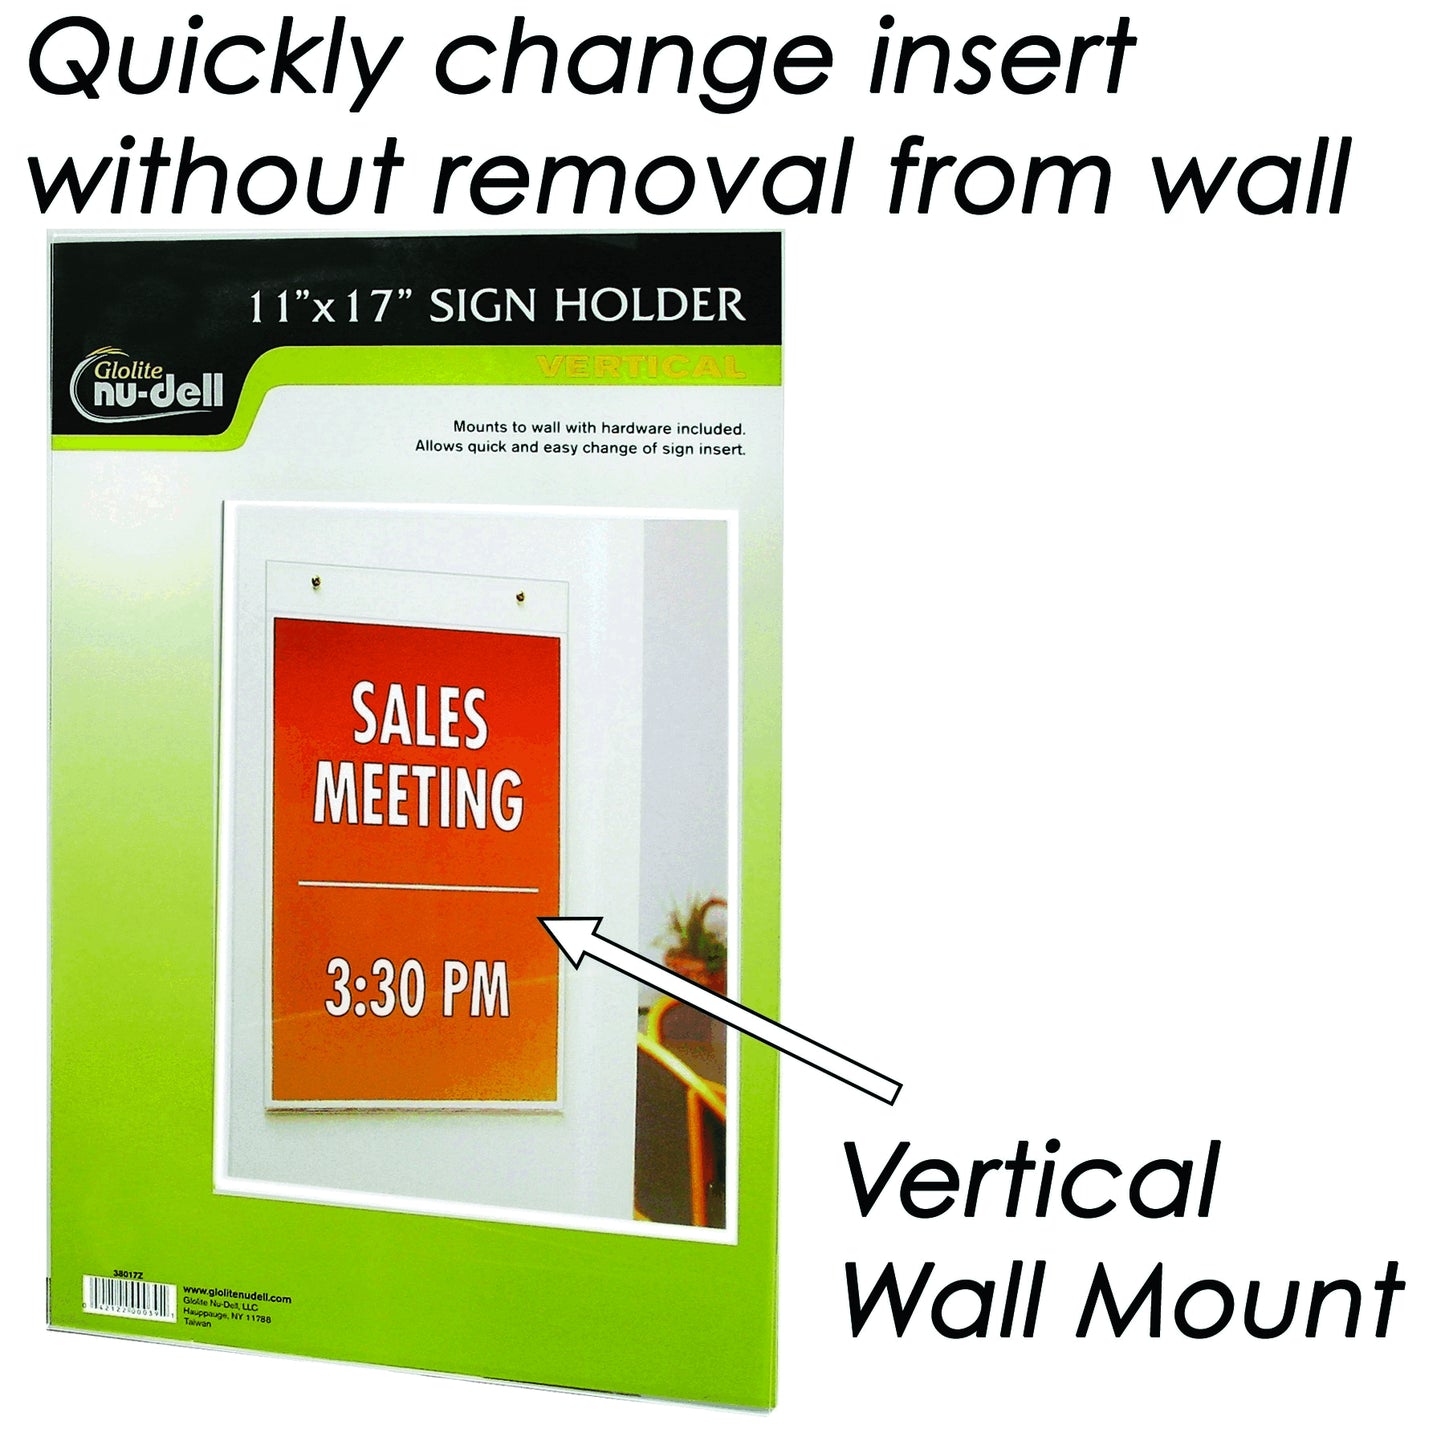 Portrait Wall Mount Clear Plastic Sign Holder 11" x 17"